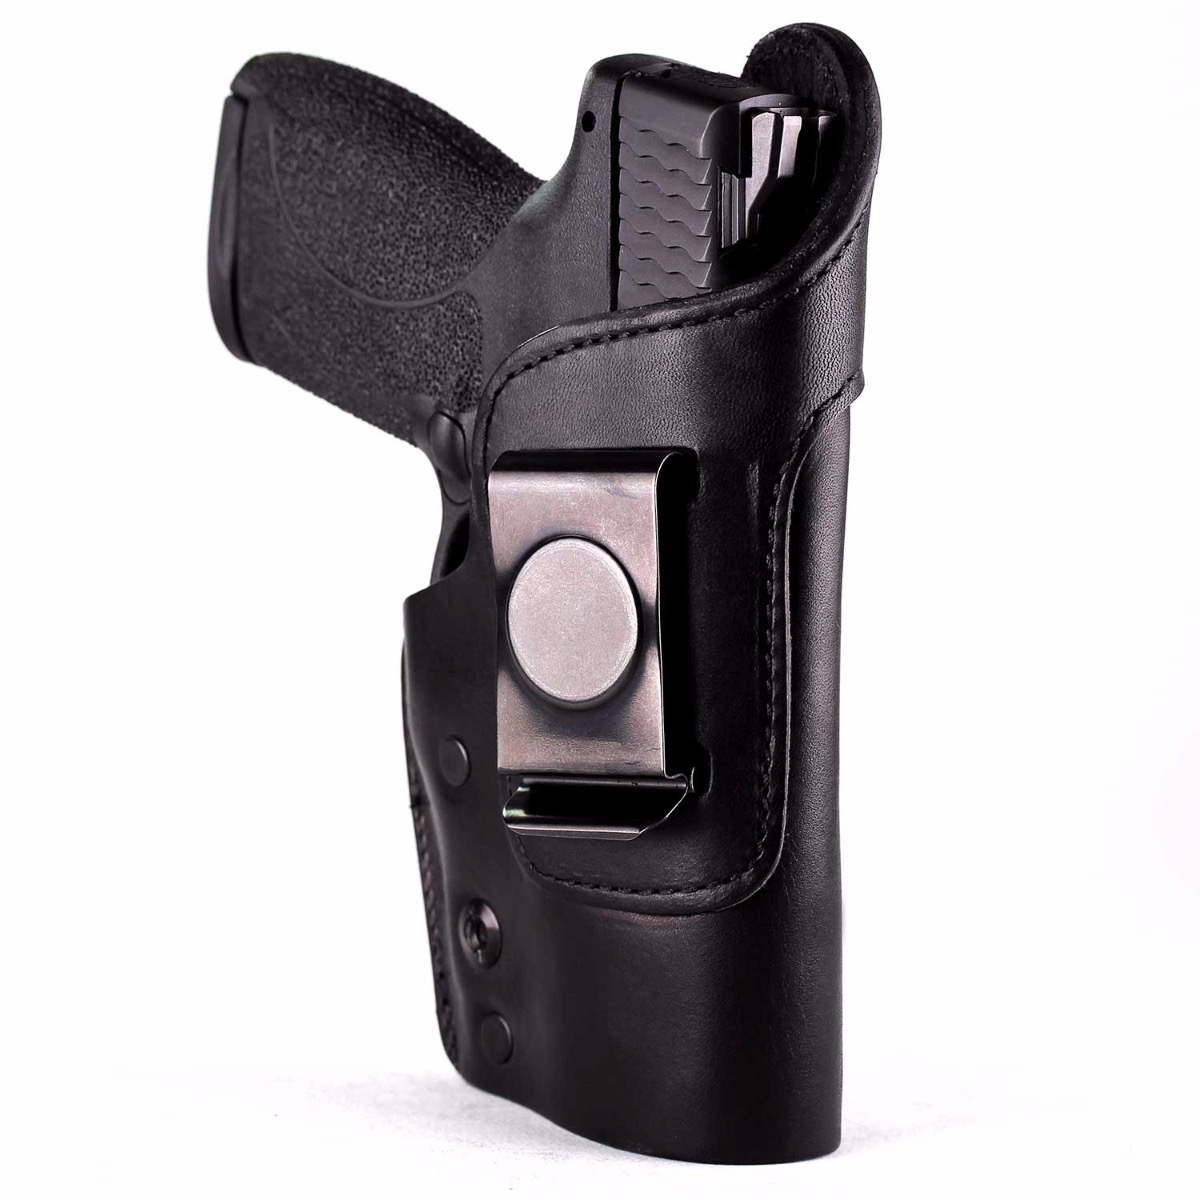 CZ-USA Shadow 2 Holster IWB Concealment RIGHT Hand Kydex Badger Holsters 